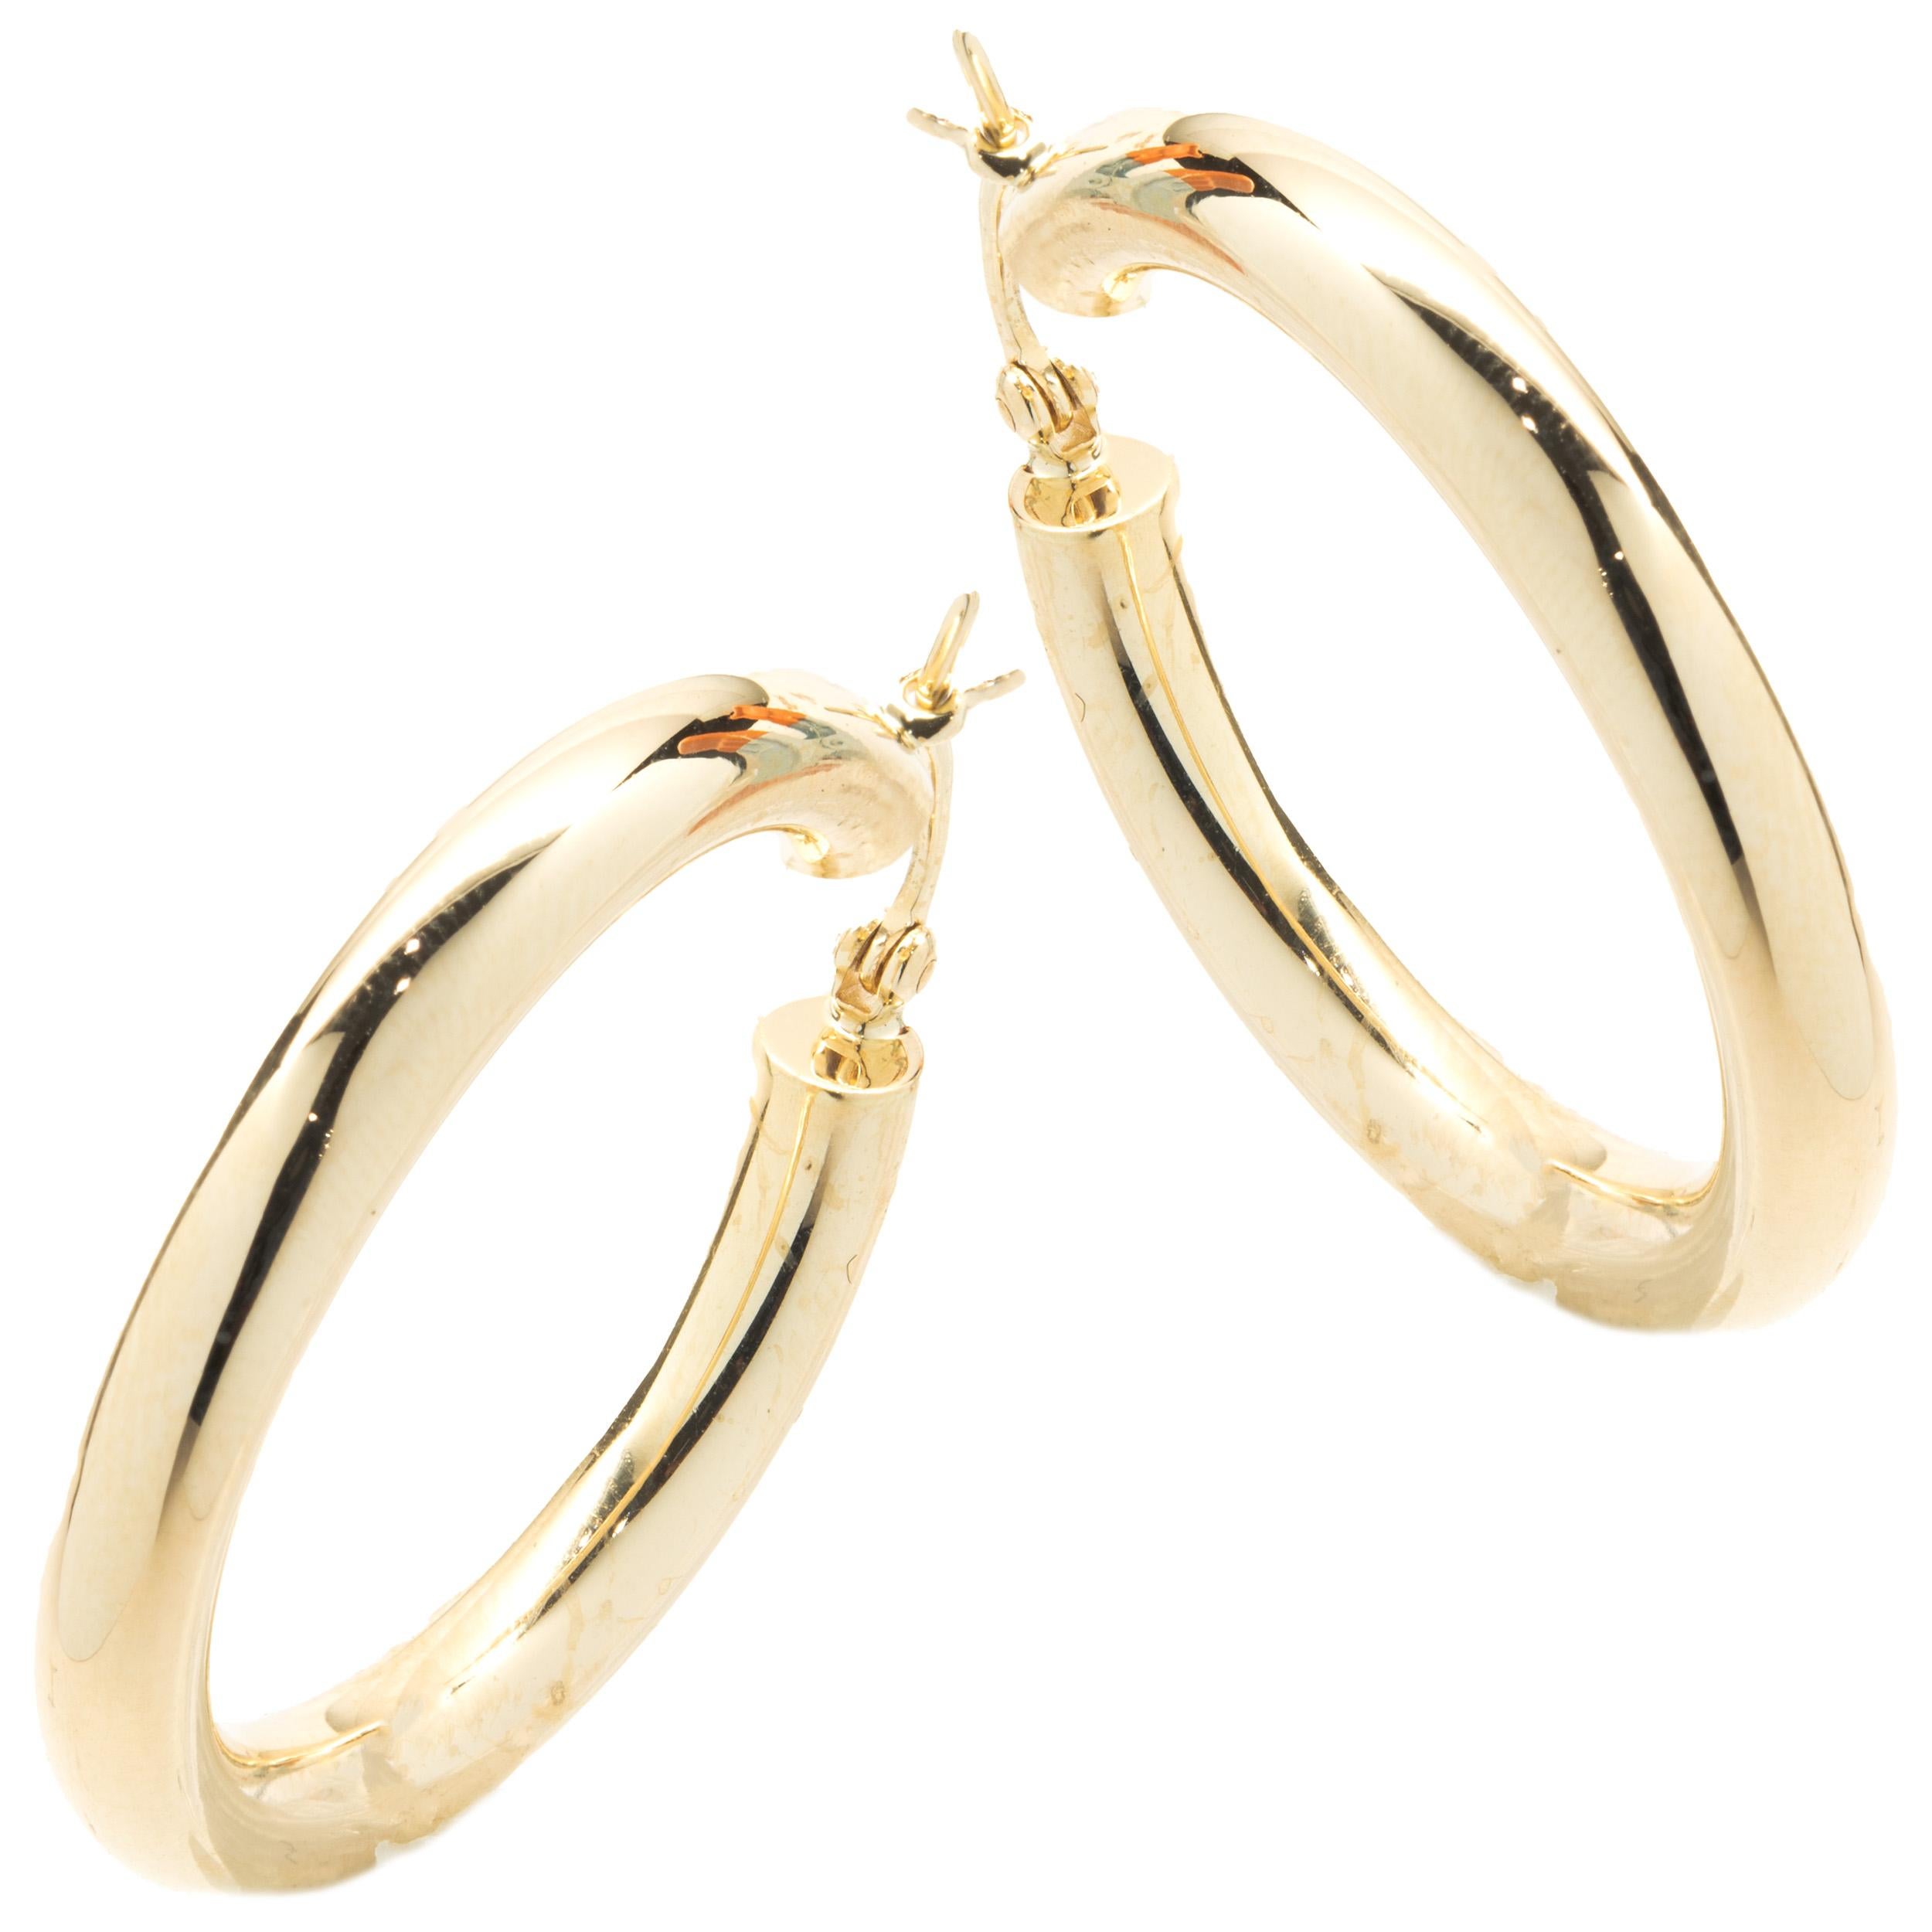 Material: 14K yellow gold
Dimensions: earrings measure 30mm in length
Weight:  3.48 grams
